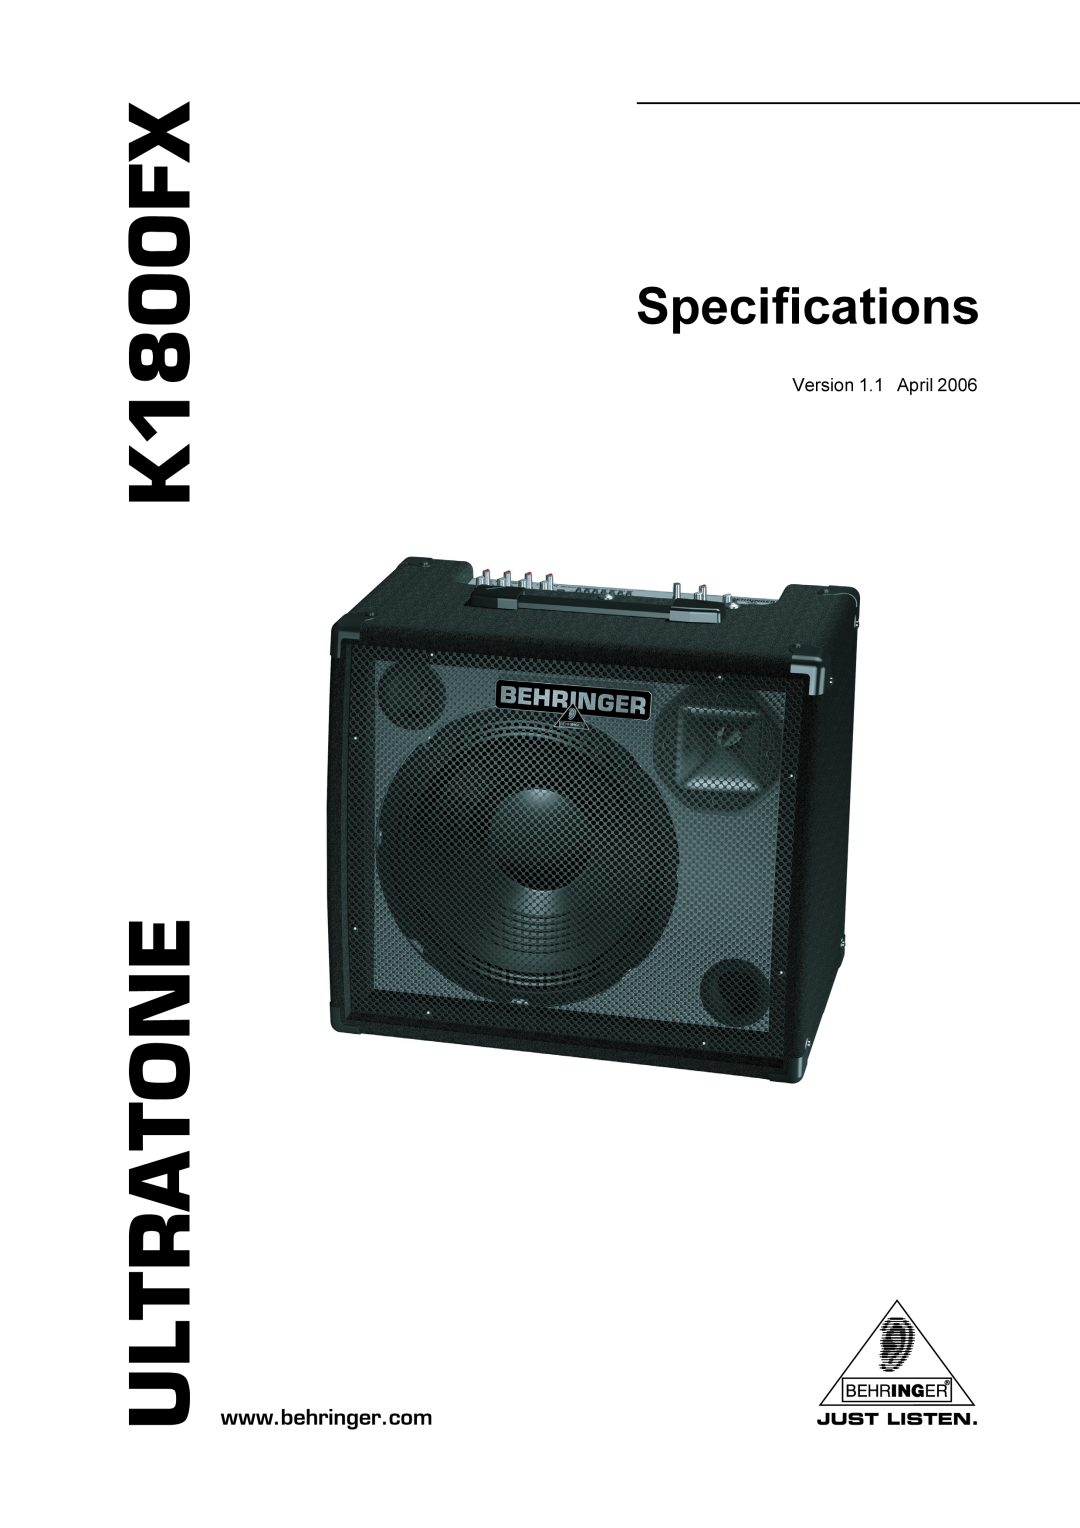 Behringer specifications K1800FX ULTRATONE, Specifications 